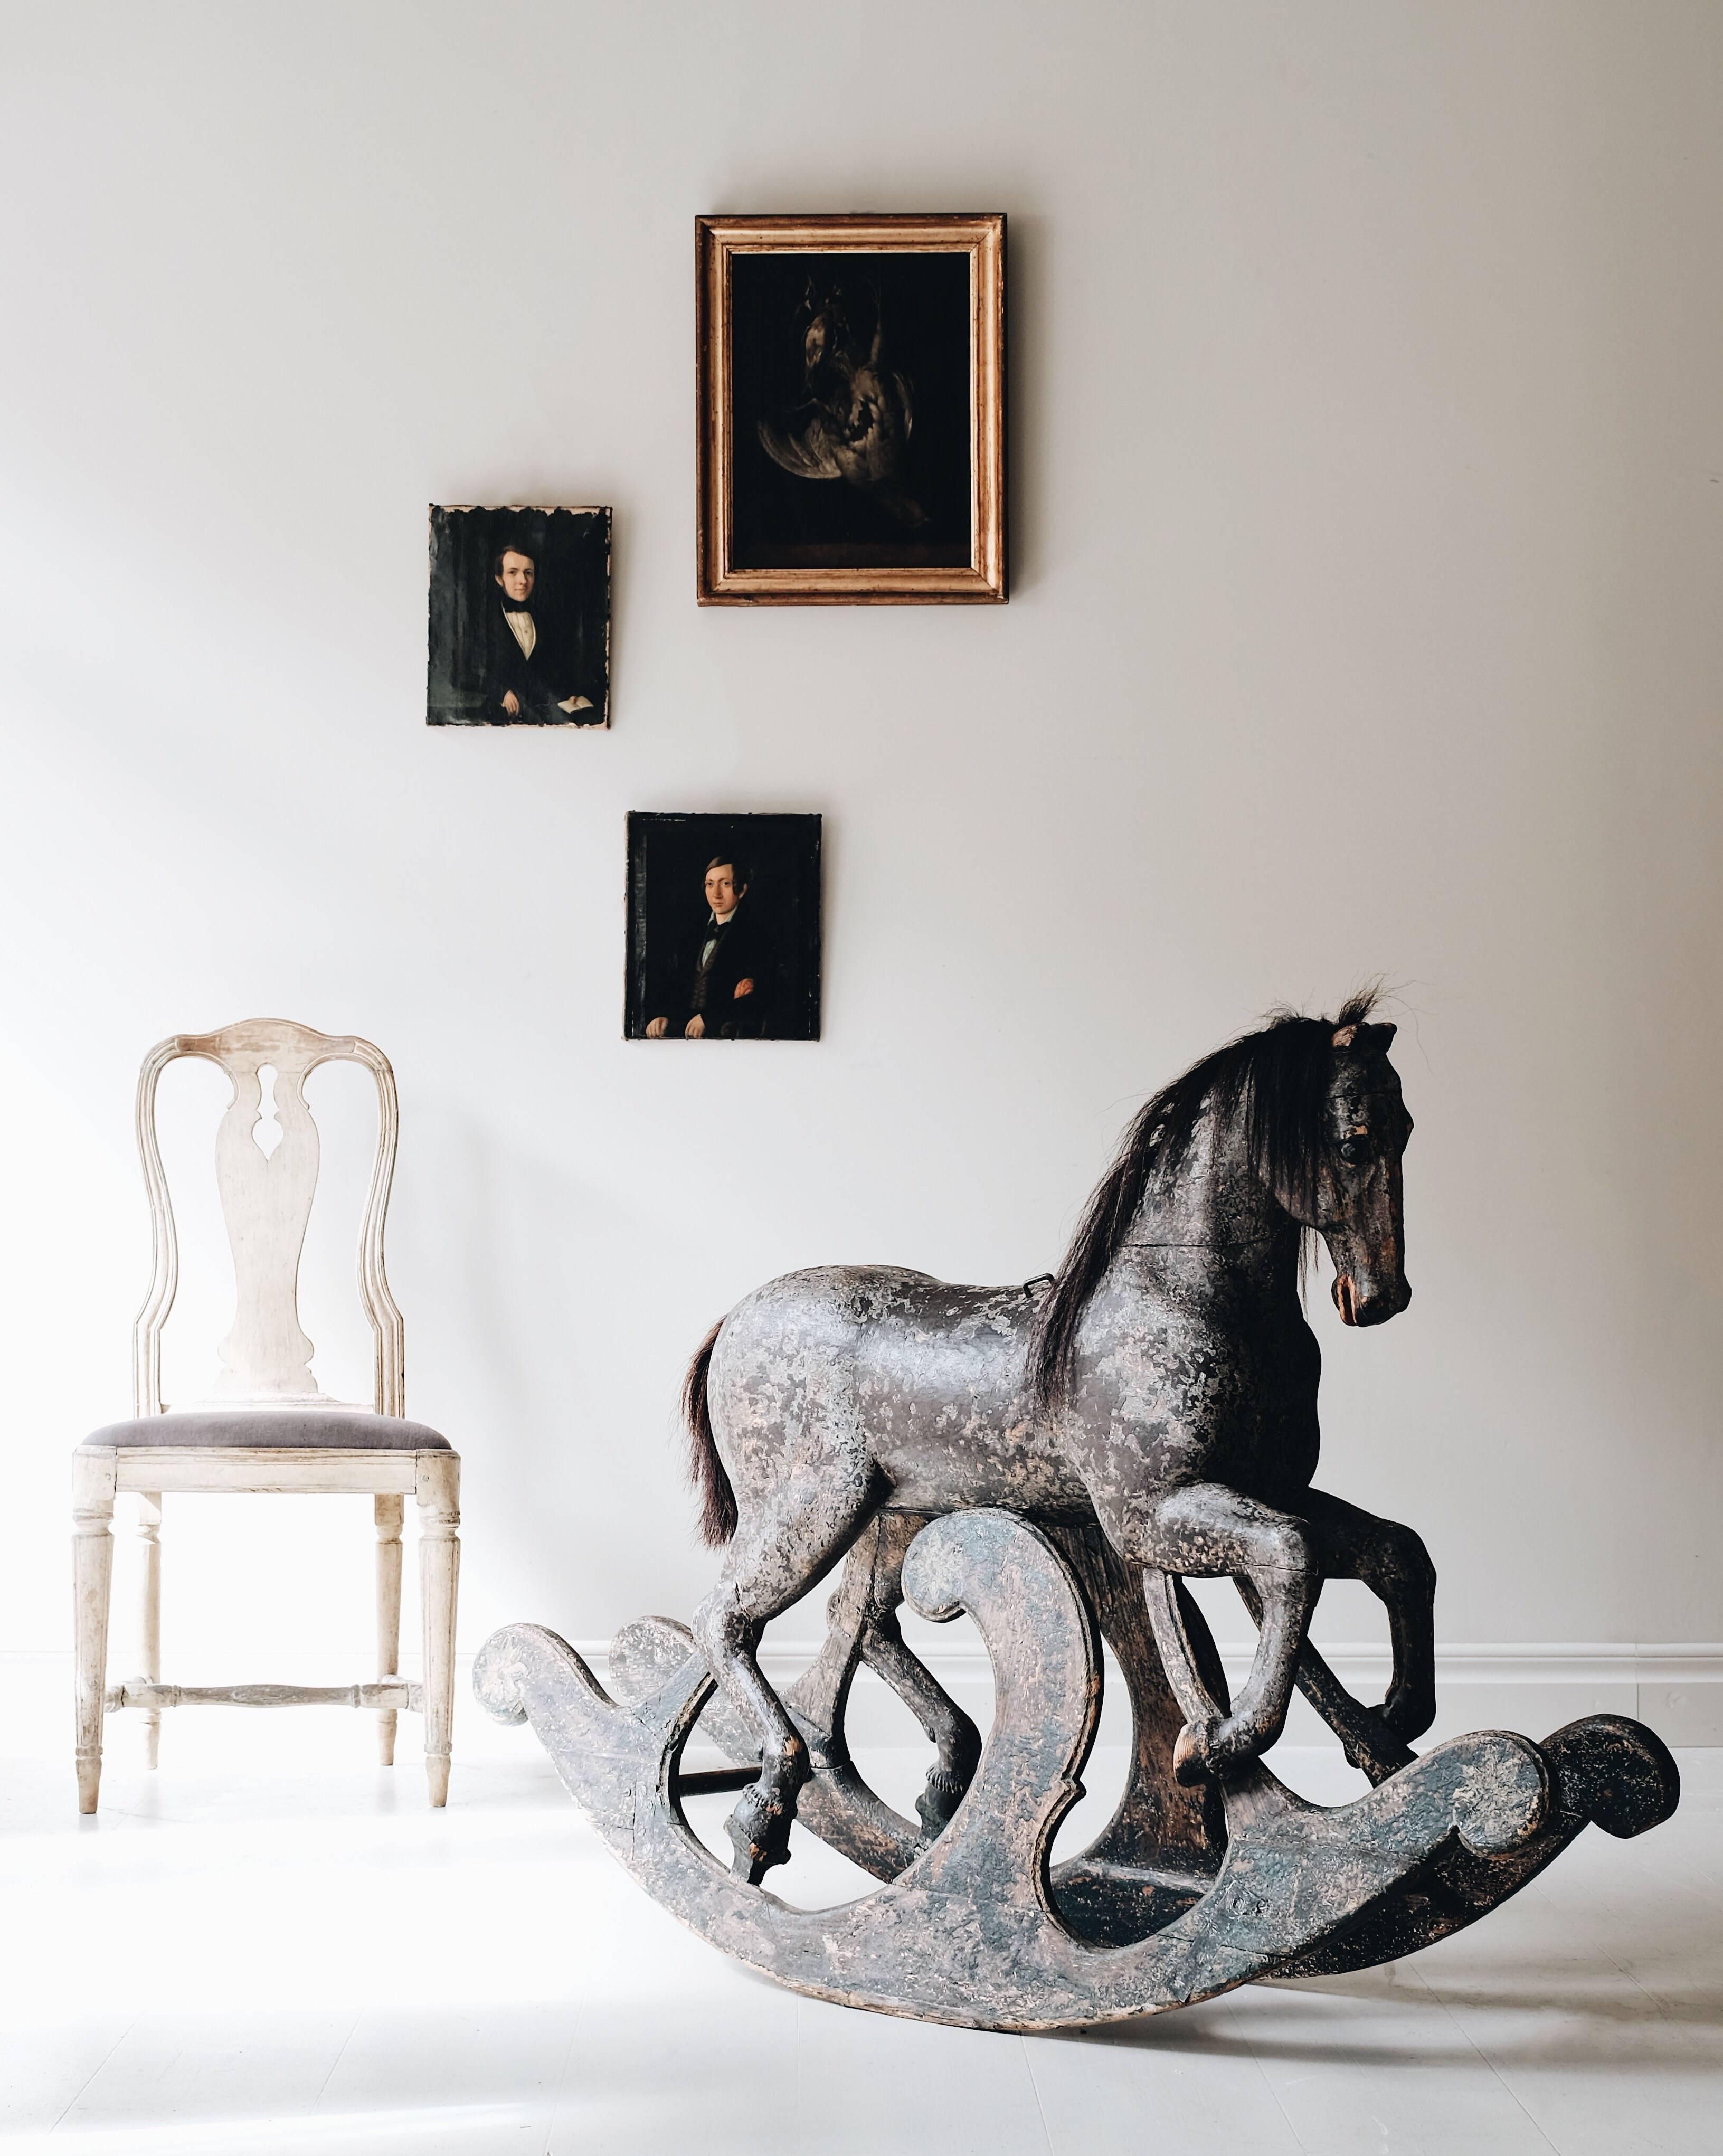 Exceptional 18th century Swedish Rococo wooden rocking horse in original color with great proportions and detail. Original horse hair on mane and tail, circa 1750, Sweden.